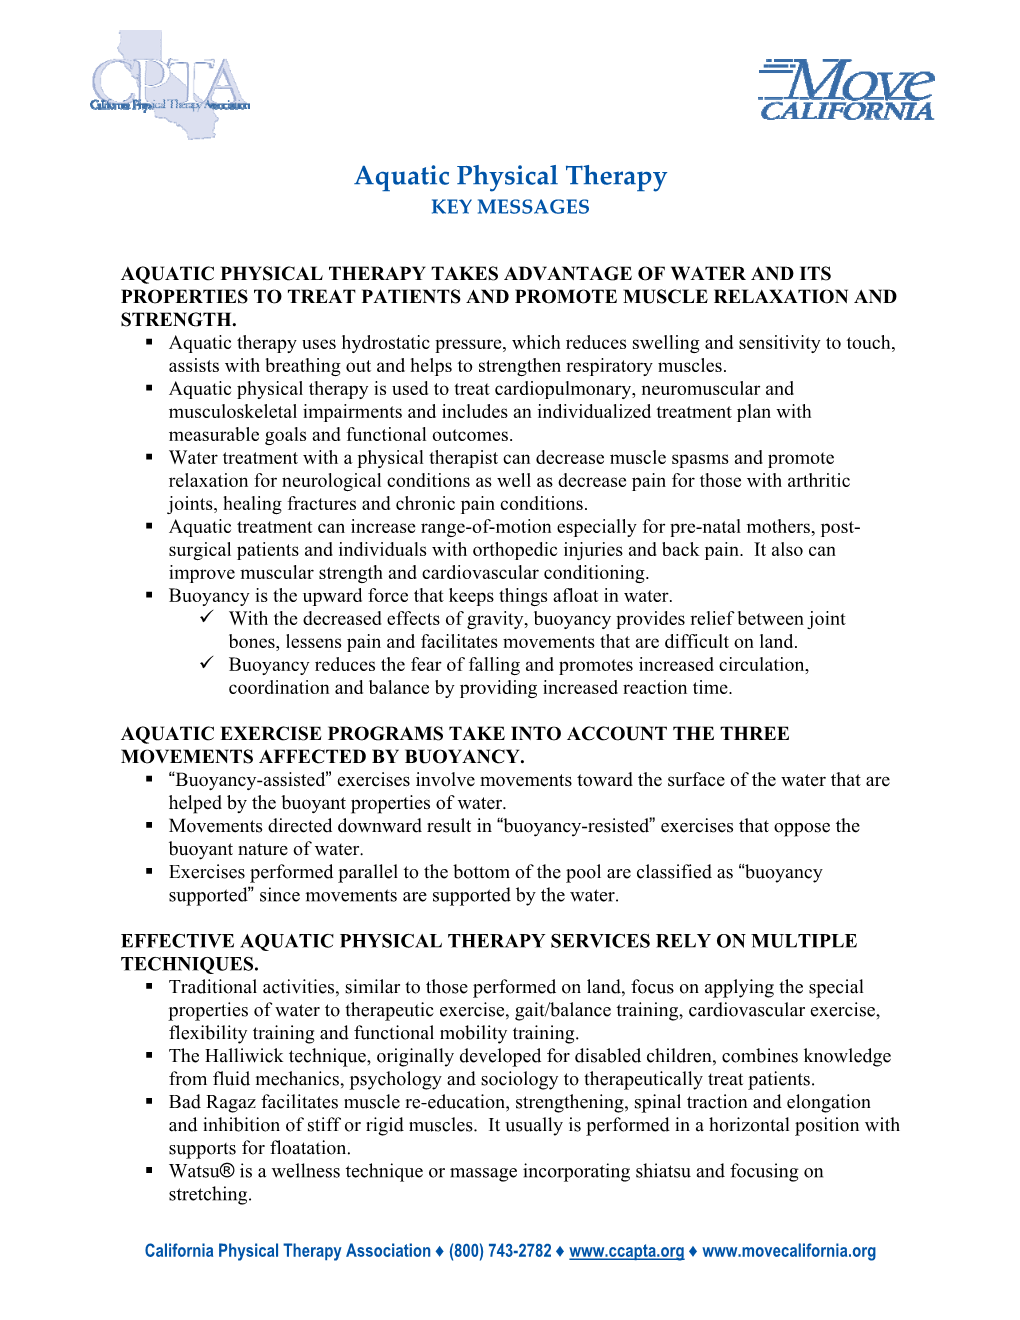 Aquatic Physical Therapy: Key Messages